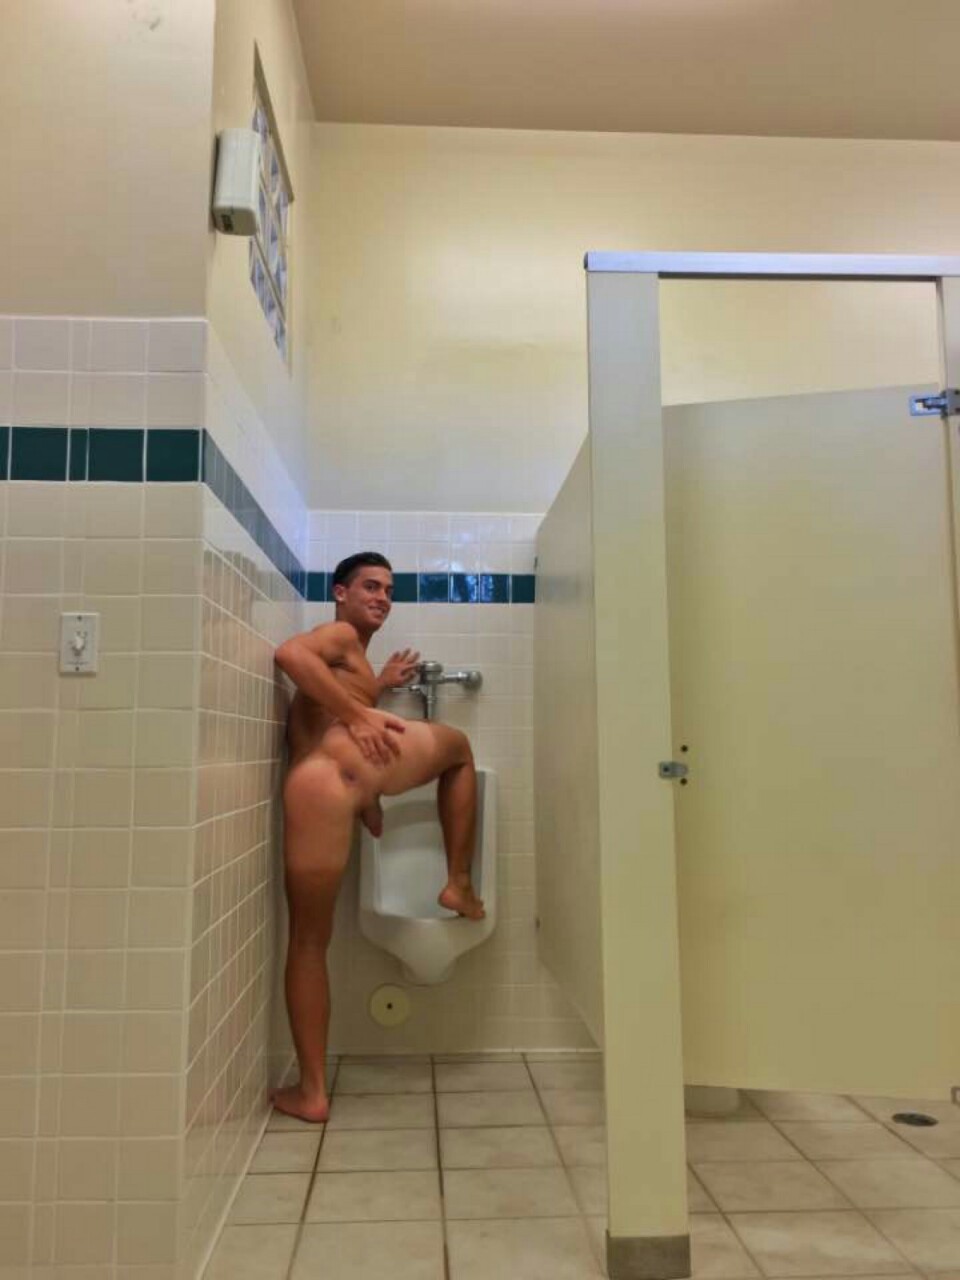 sexysubdad:  When using a public urinal, a sub should drop its pants entirely, or